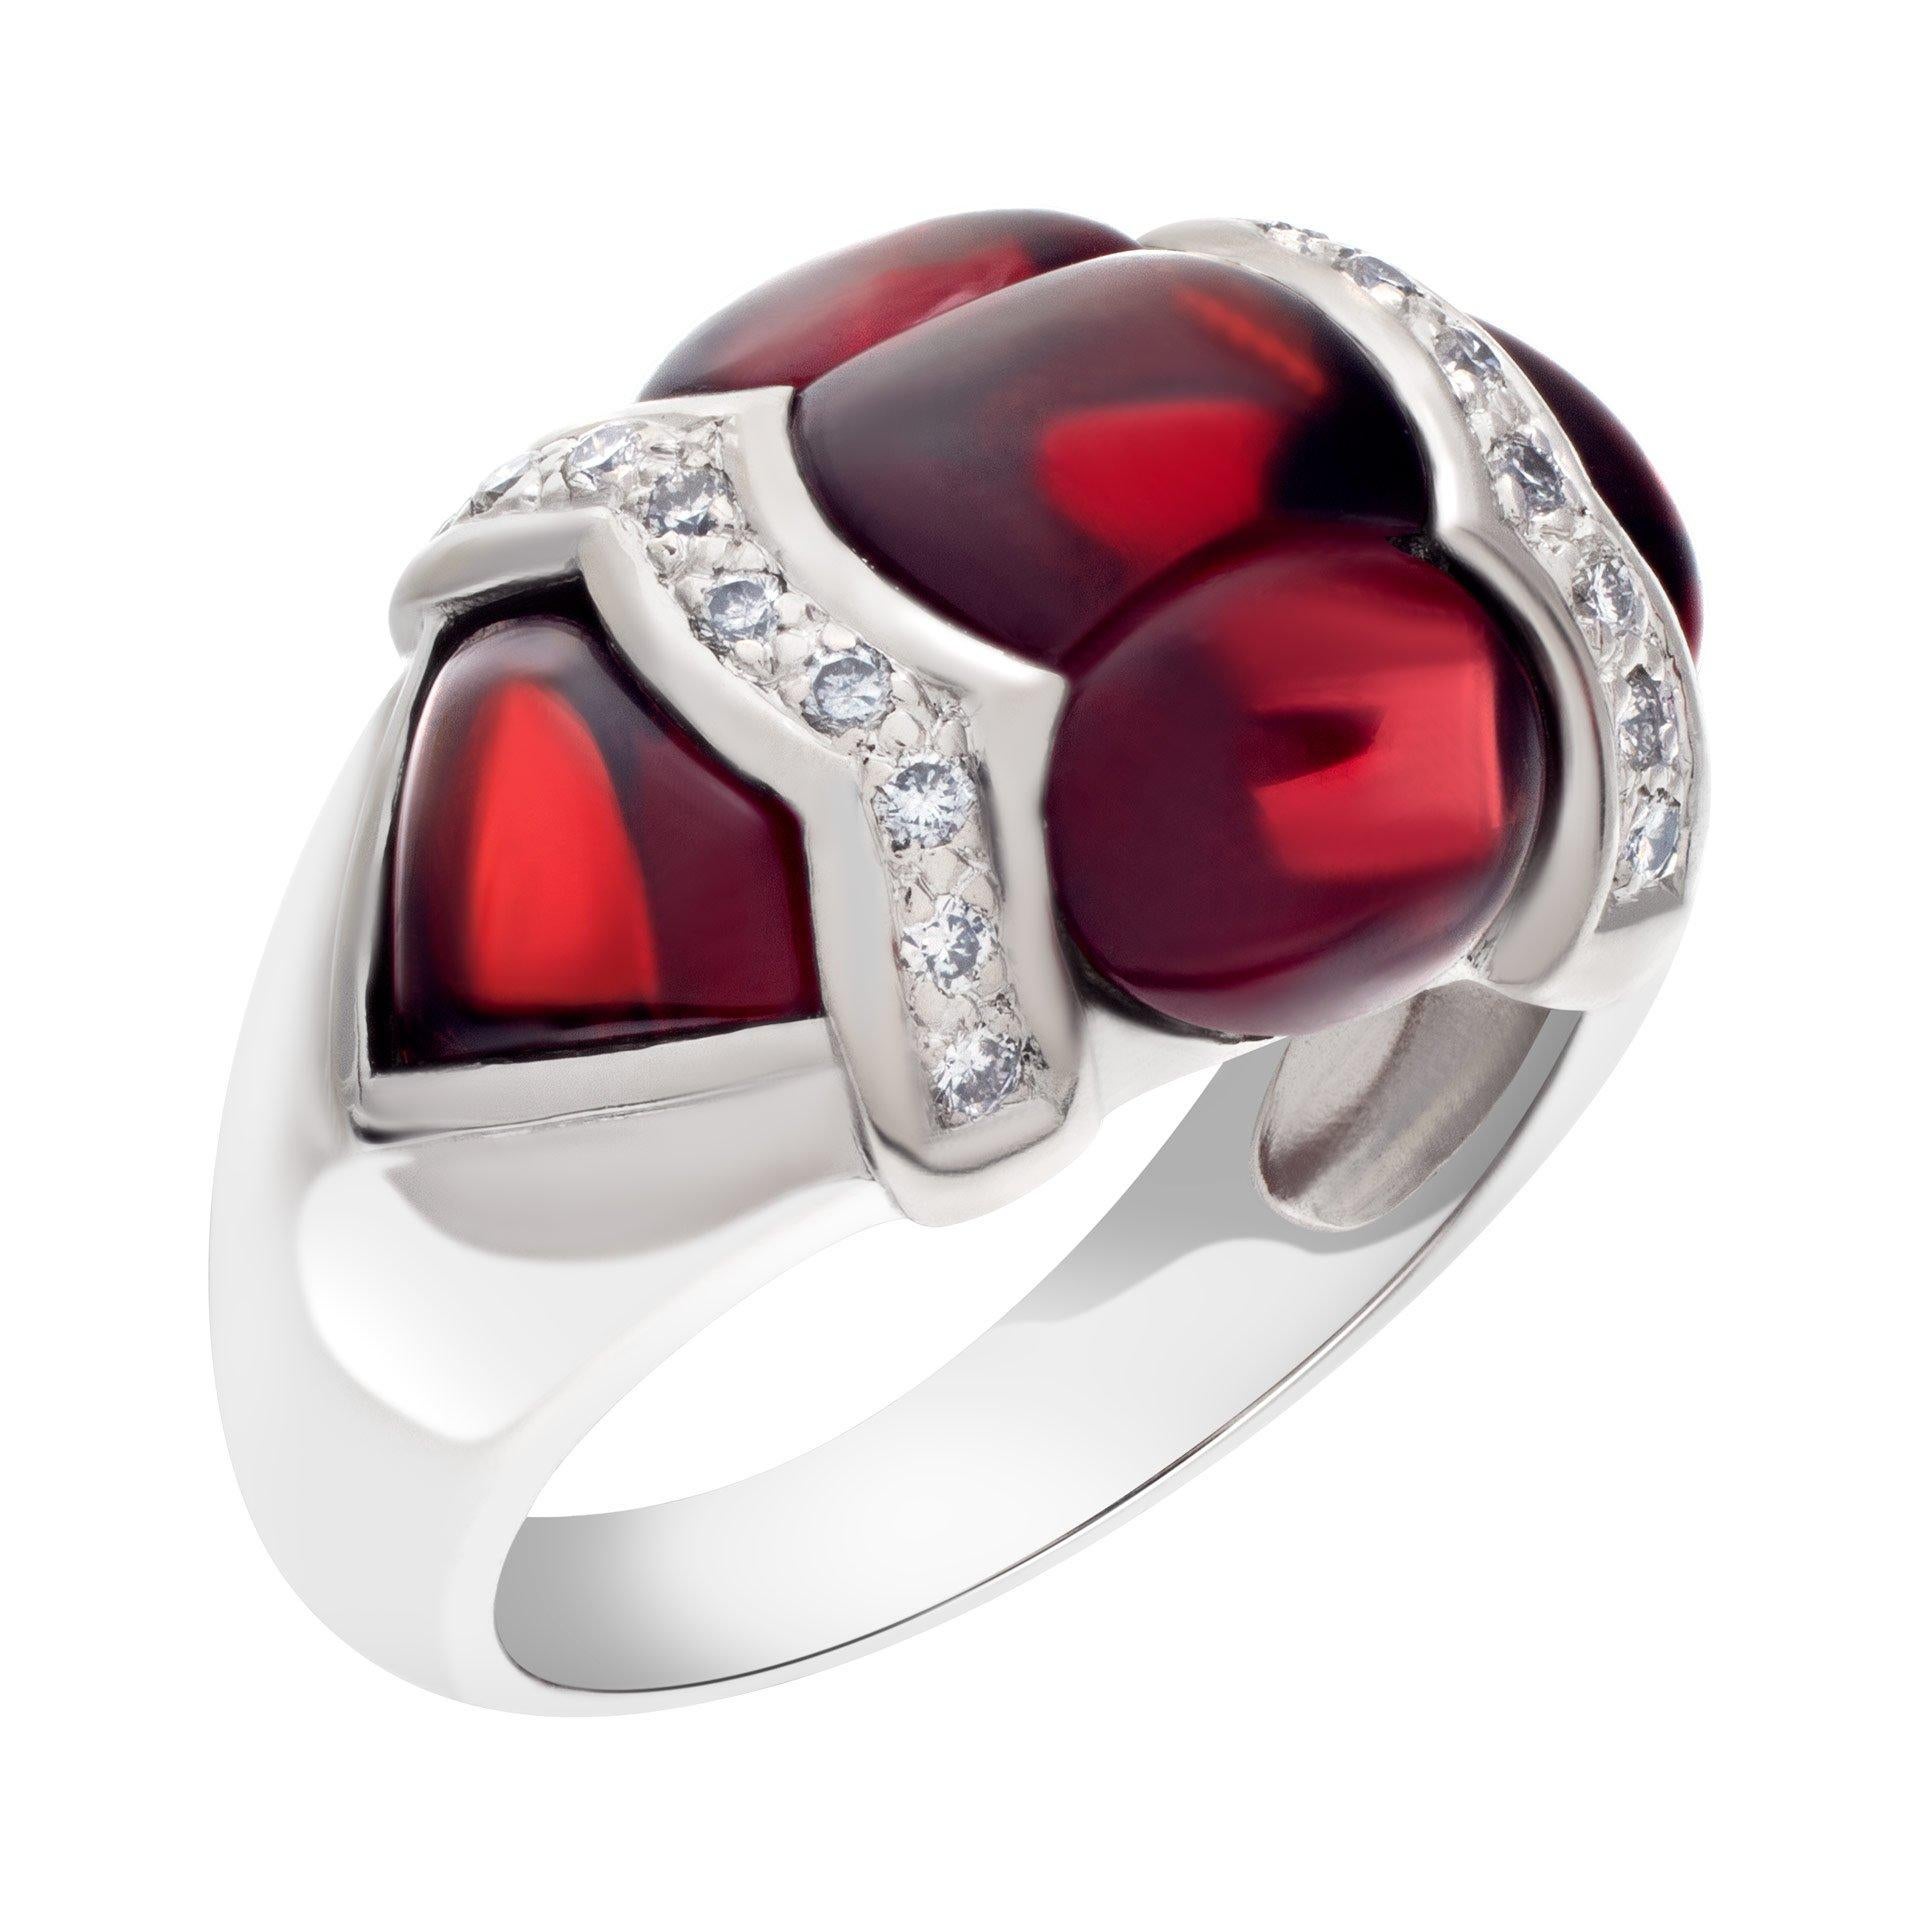 Eye catching cabochon red garnet ring with diamond accents that total 0.20 carat set in 18k white gold. Size 6

This Diamond ring is currently size 6 and some items can be sized up or down, please ask! It weighs 7.1 pennyweights and is 18k White